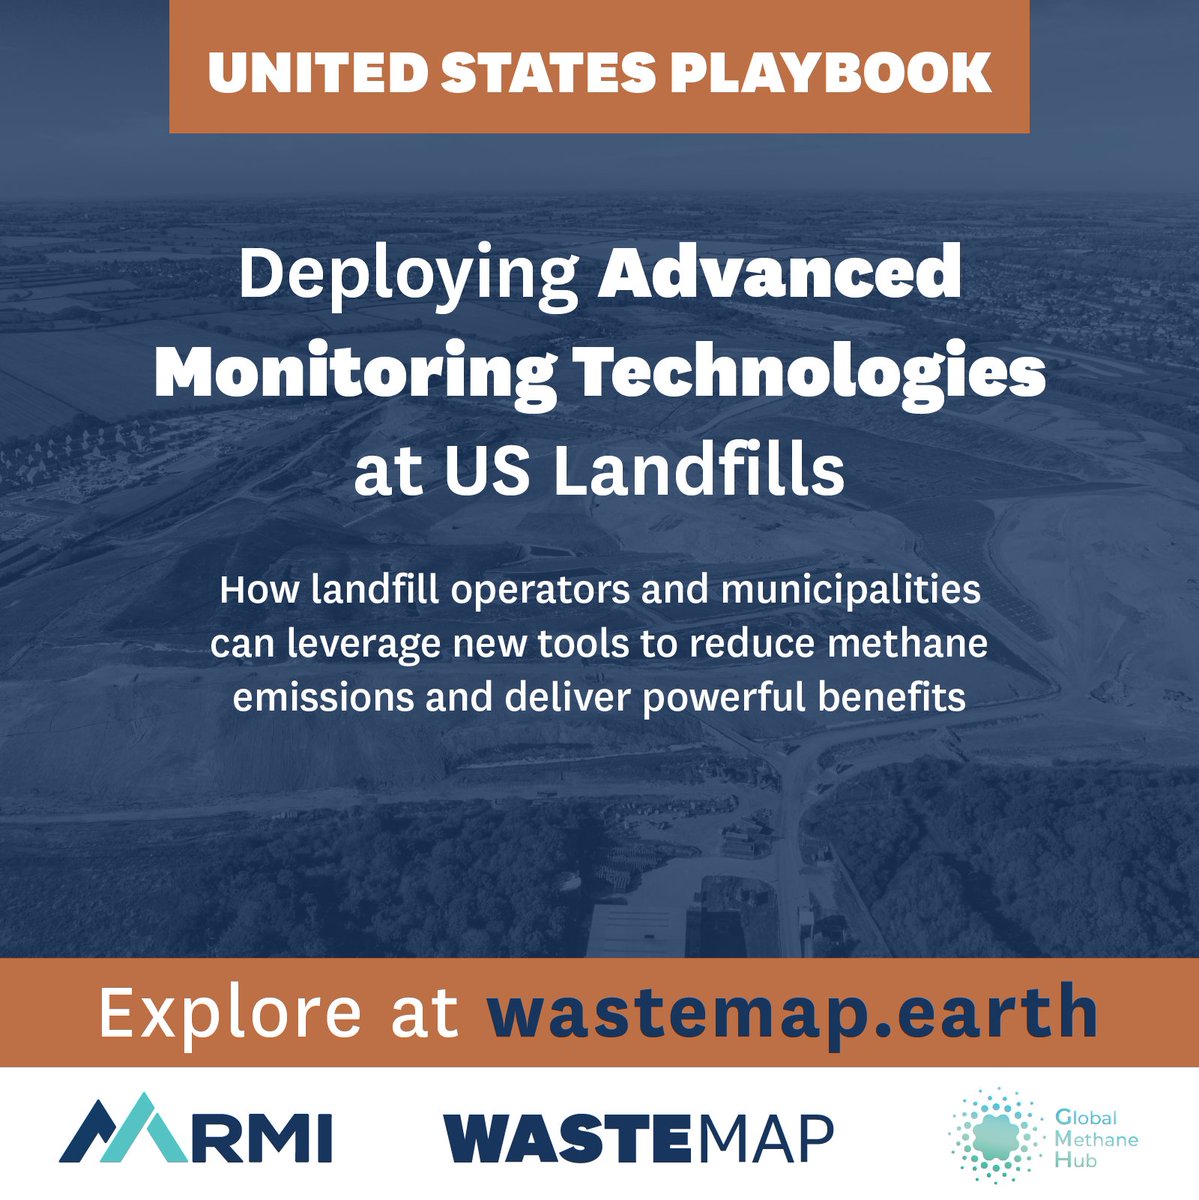 The newest playbook from @RockyMtnInst's #WasteMAP is here! Explore the United States Playbook to learn how #landfill operators and municipalities in the US can leverage new tools to reduce #methane emissions and deliver powerful benefits. wastemap.earth/resources 🔗